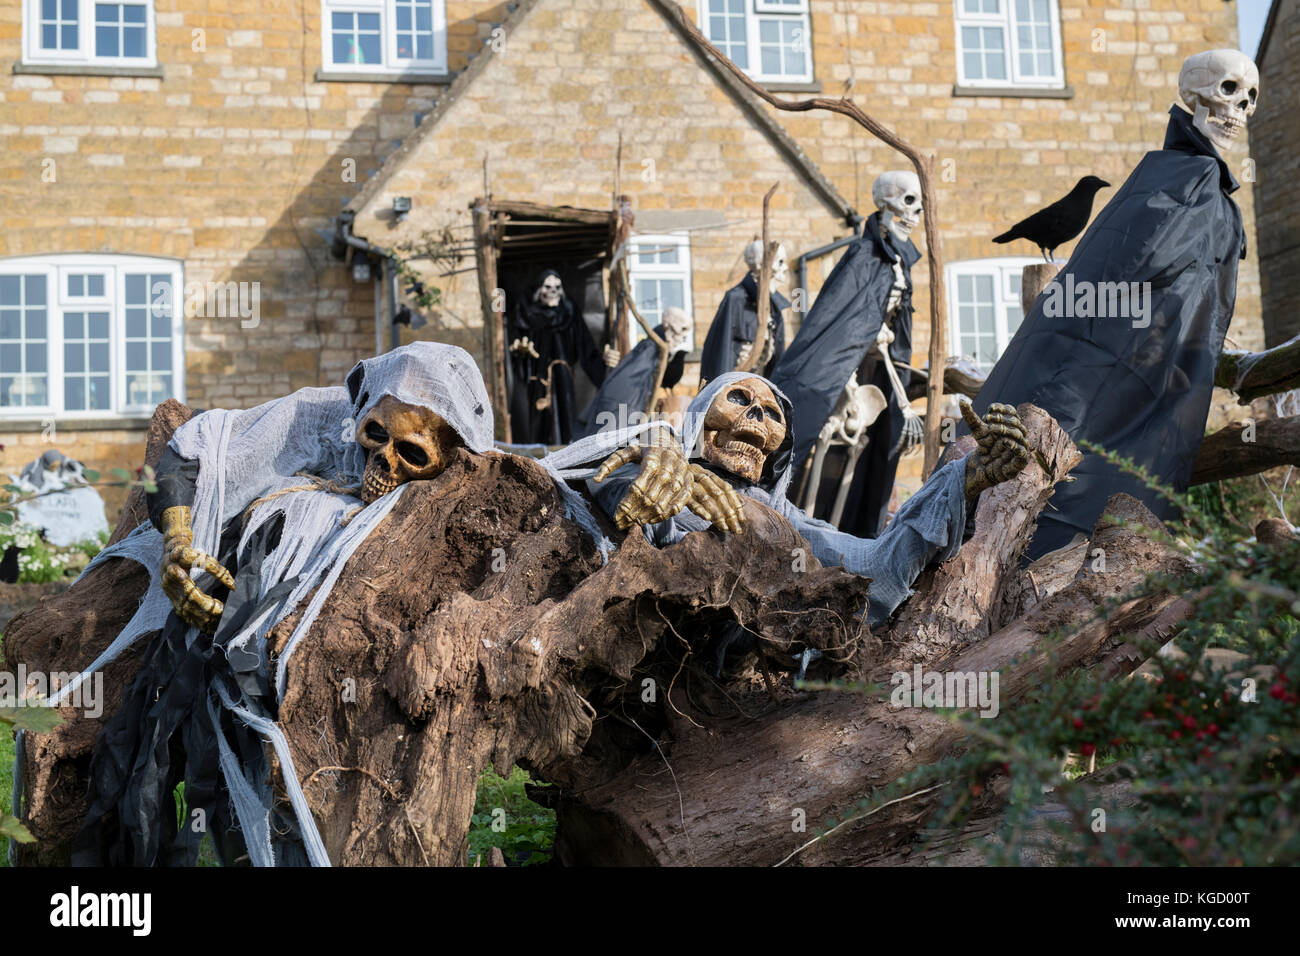 Halloween skeletons and grim reaper outside a house in Snowshill, Cotswolds, Gloucestershire, England Stock Photo